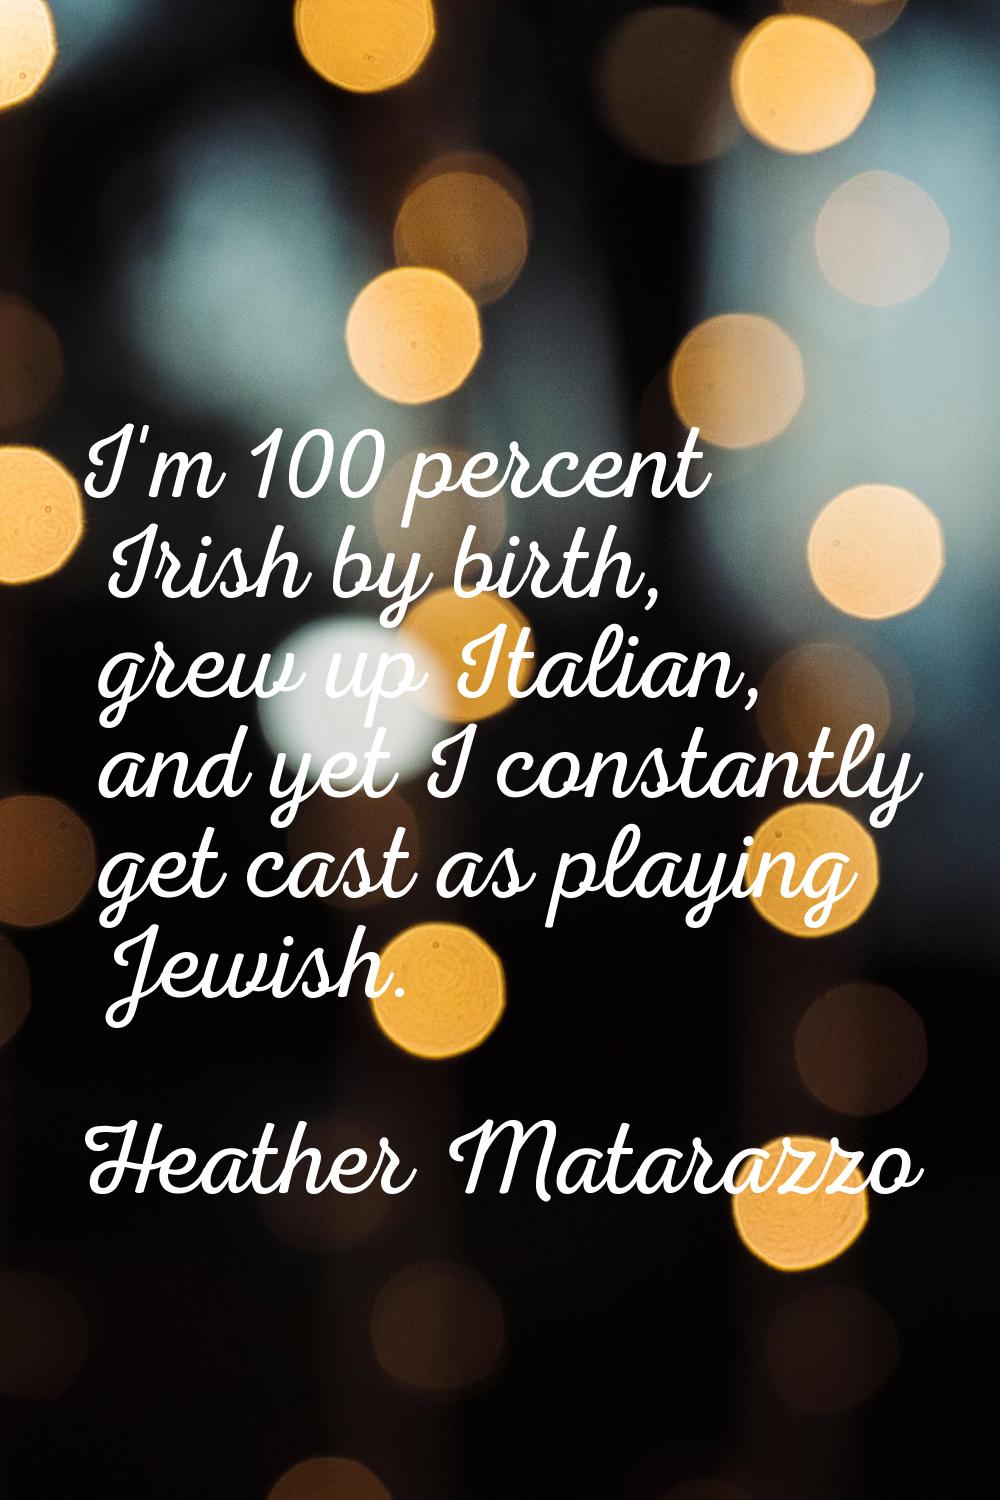 I'm 100 percent Irish by birth, grew up Italian, and yet I constantly get cast as playing Jewish.